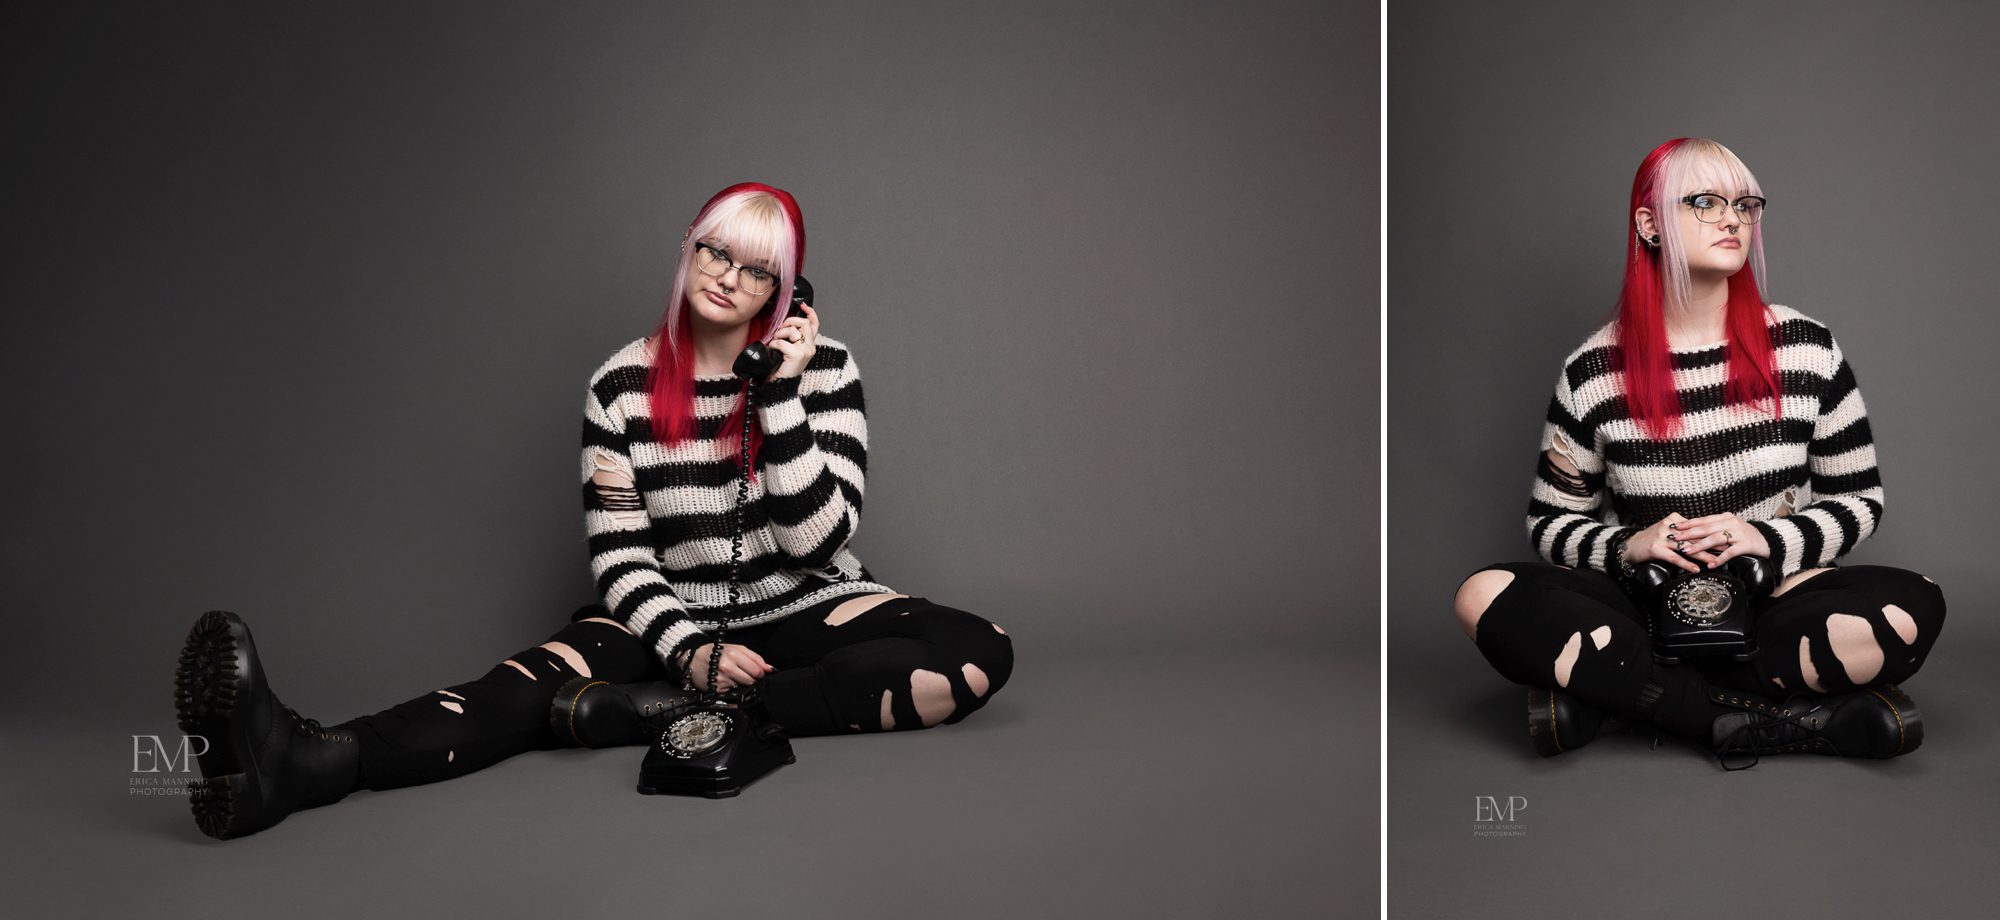 High school senior girl emo with red hair portraits with vintage rotary phone